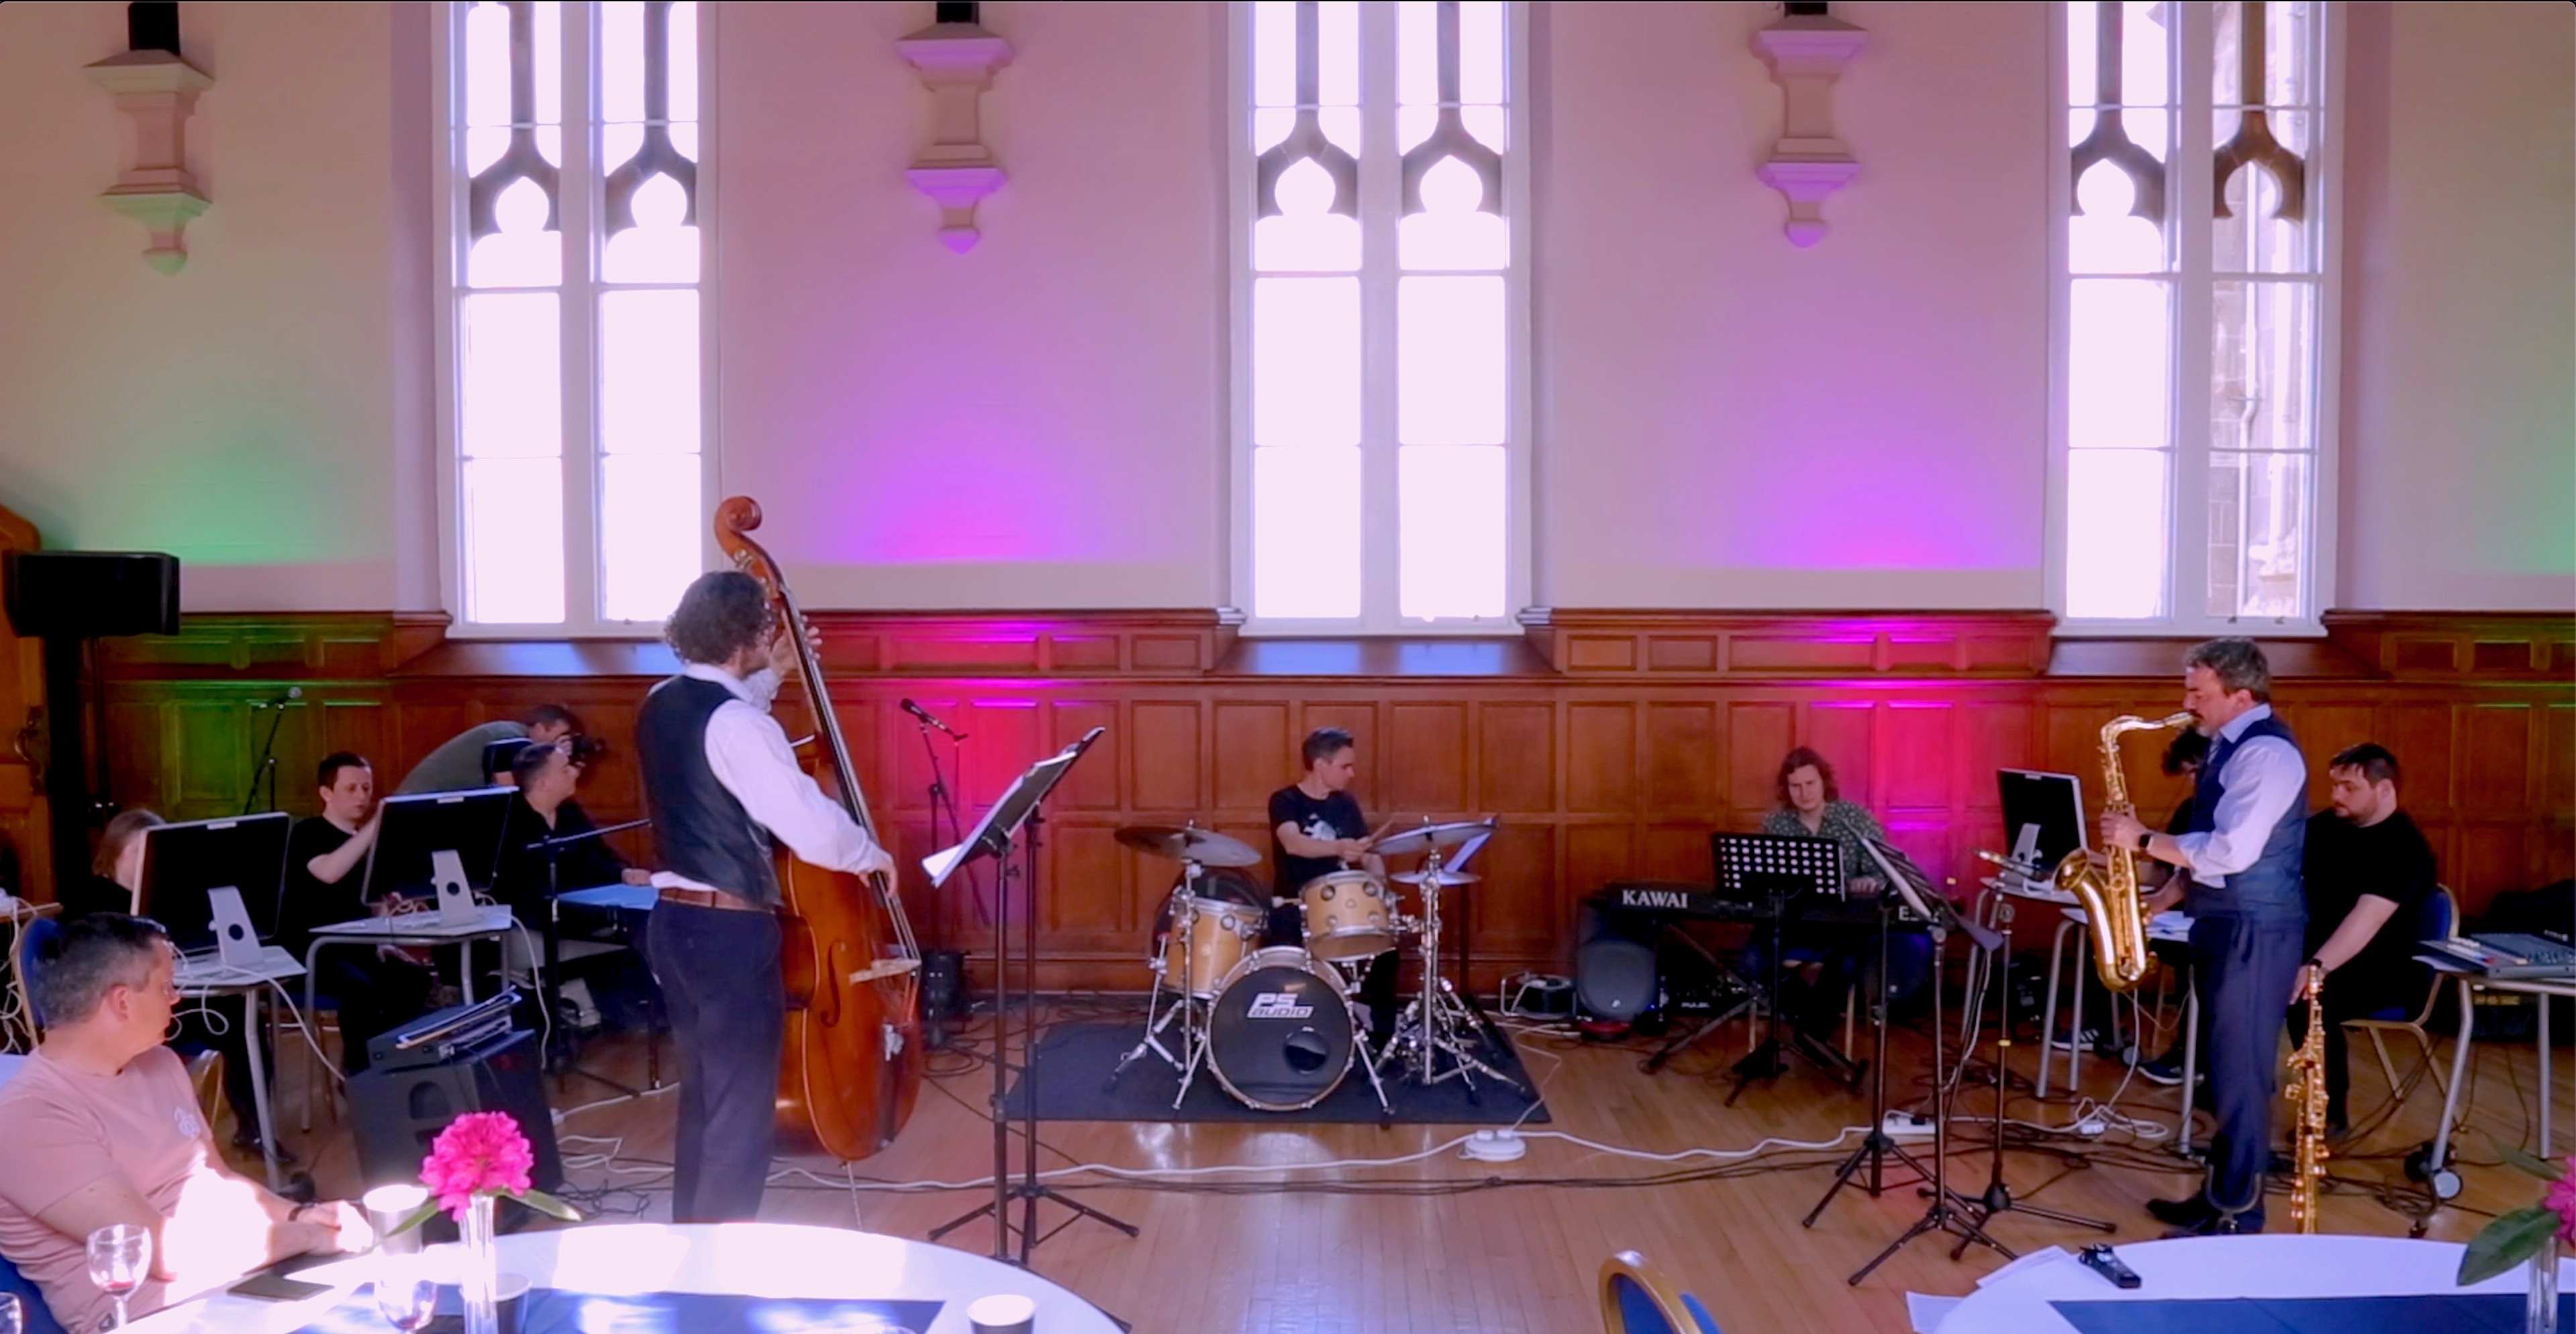 Acoustronic perform with world renowned jazz musicians at 2018 Derry International Jazz Festival